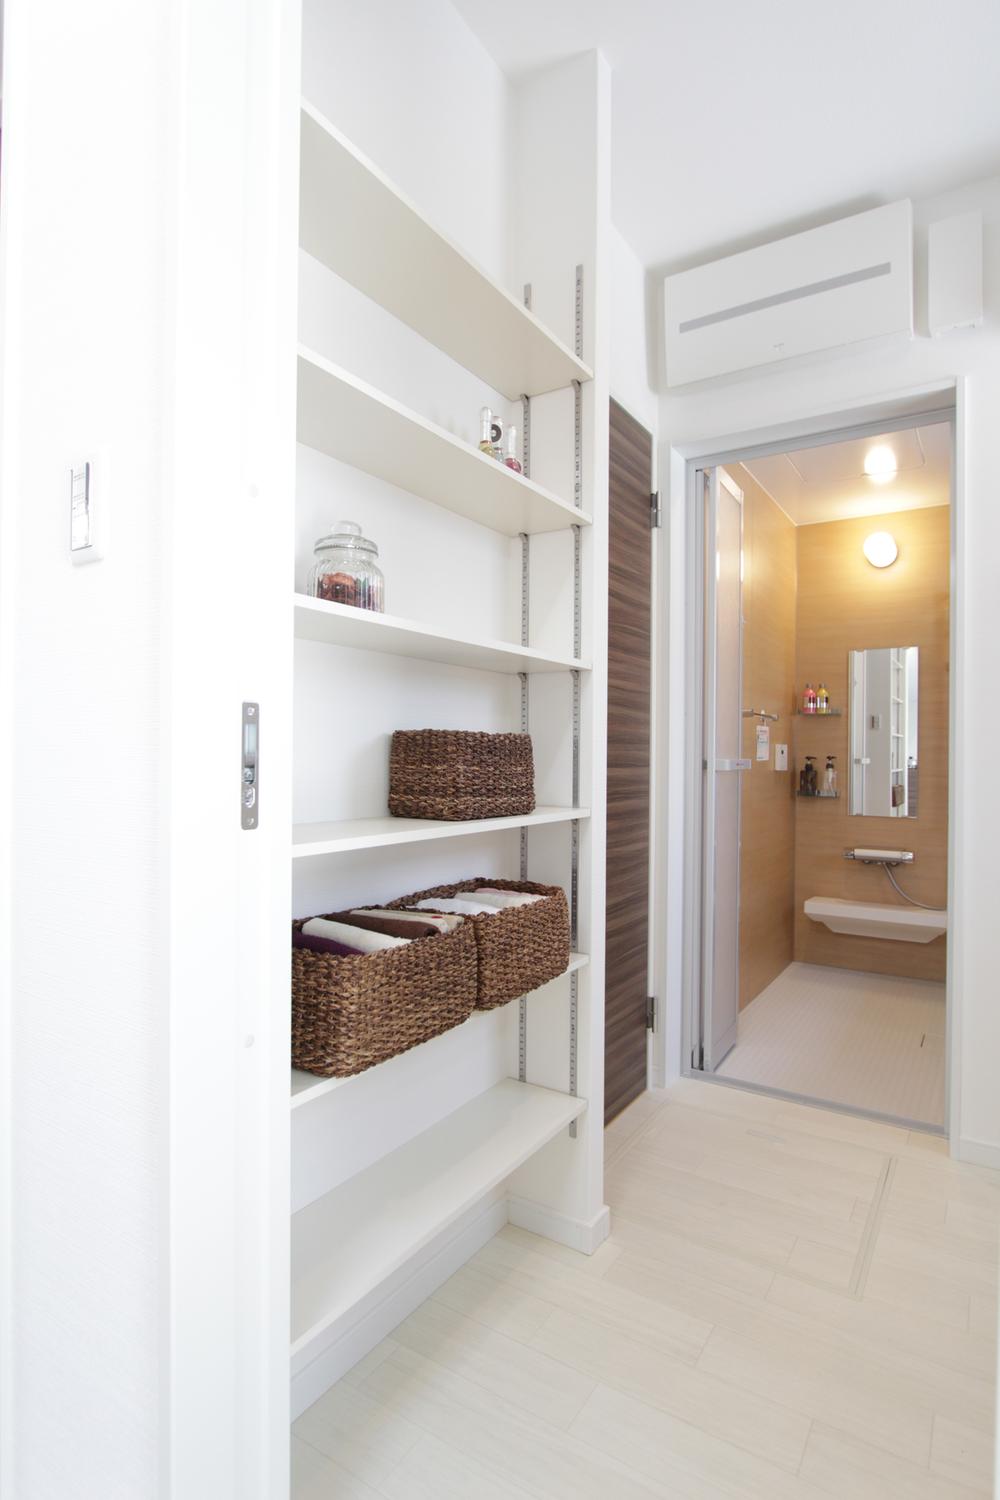 Building plan example (introspection photo). Storage shelves in the wash room is convenient for idea to put a towel and change of clothes.